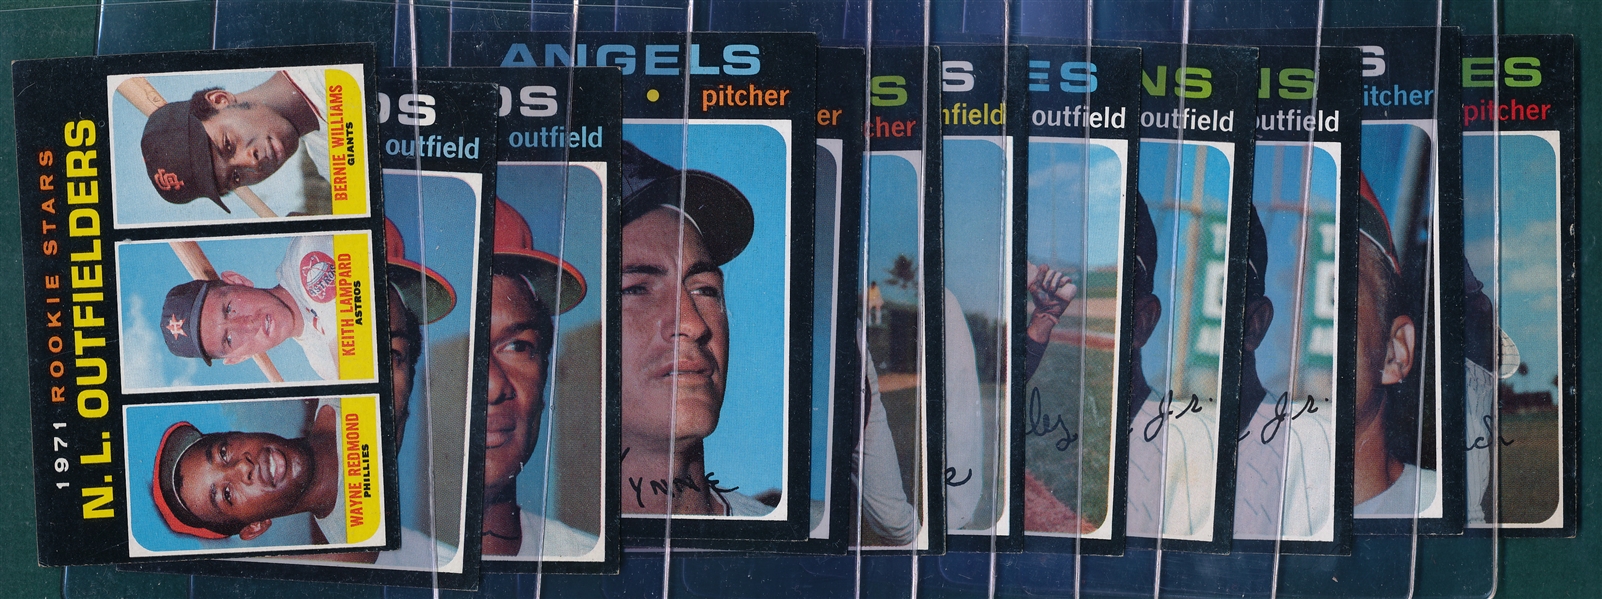 1971 Topps Lot of (32) High Numbers *High Grade* W/ Mincher